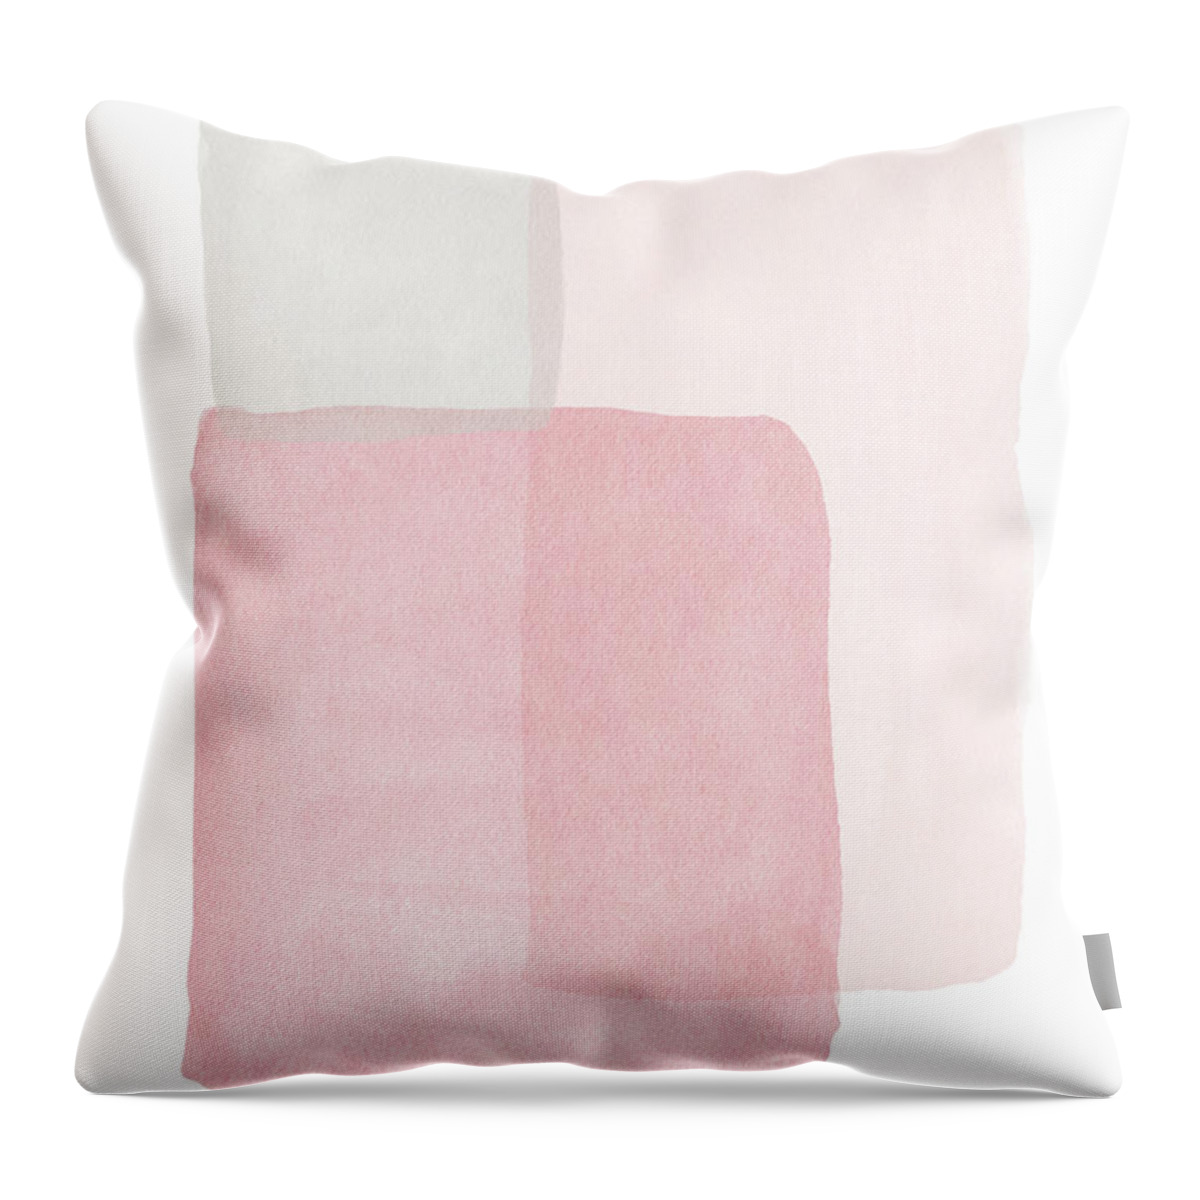 Watercolor Pink Millennial Sage Blush Boxes Watercolor Painting Boho Bohemian Modern Pretty Bathroom Art Bedroom Art Pink Abstract Art Home Decorairbnb Decorliving Room Artbedroom Artcorporate Artset Designgallery Wallart By Linda Woodsart For Interior Designersgreeting Cardpillowtotehospitality Arthotel Artart Licensing Throw Pillow featuring the painting Pretty Pink Boxes 1- Art by Linda Woods by Linda Woods